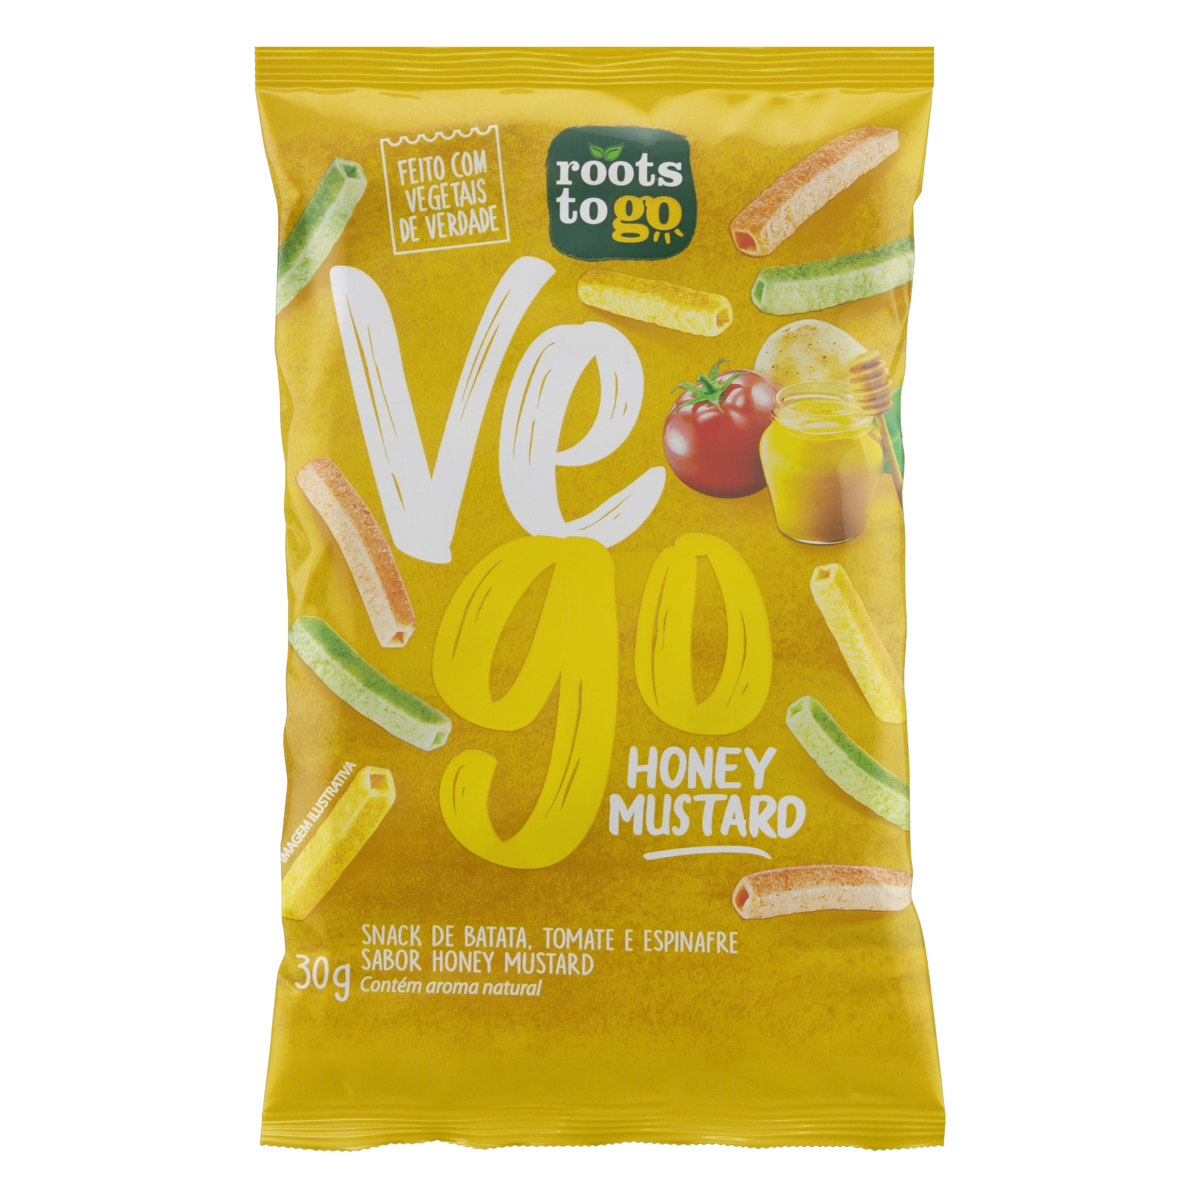 7898557010619 - SNACK HONEY MUSTARD ROOTS TO GO VEGO PACOTE 30G